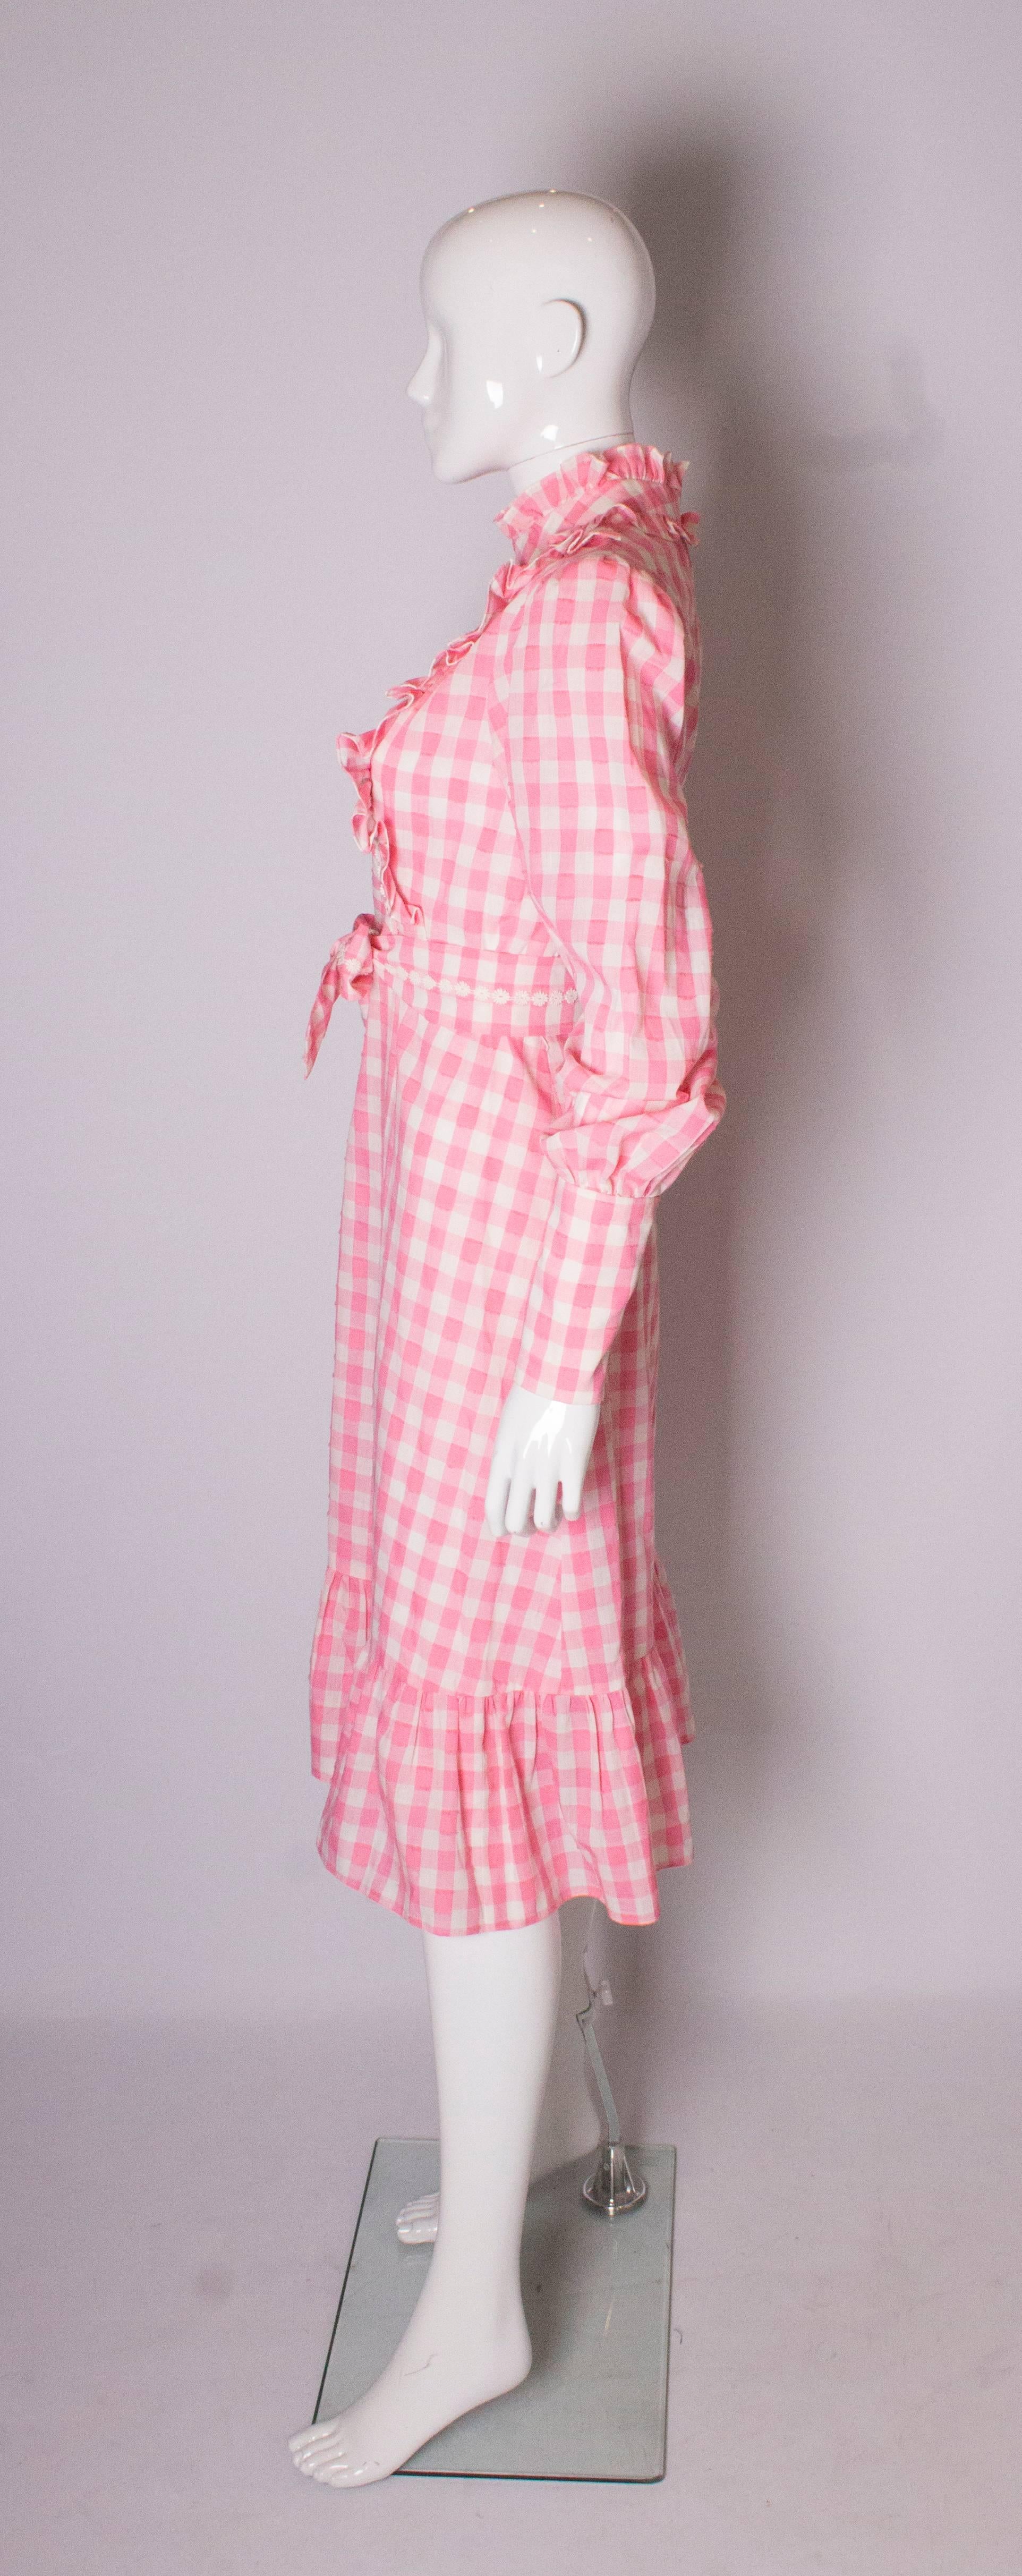 Vintage Susan Small Pink and White Dress 1